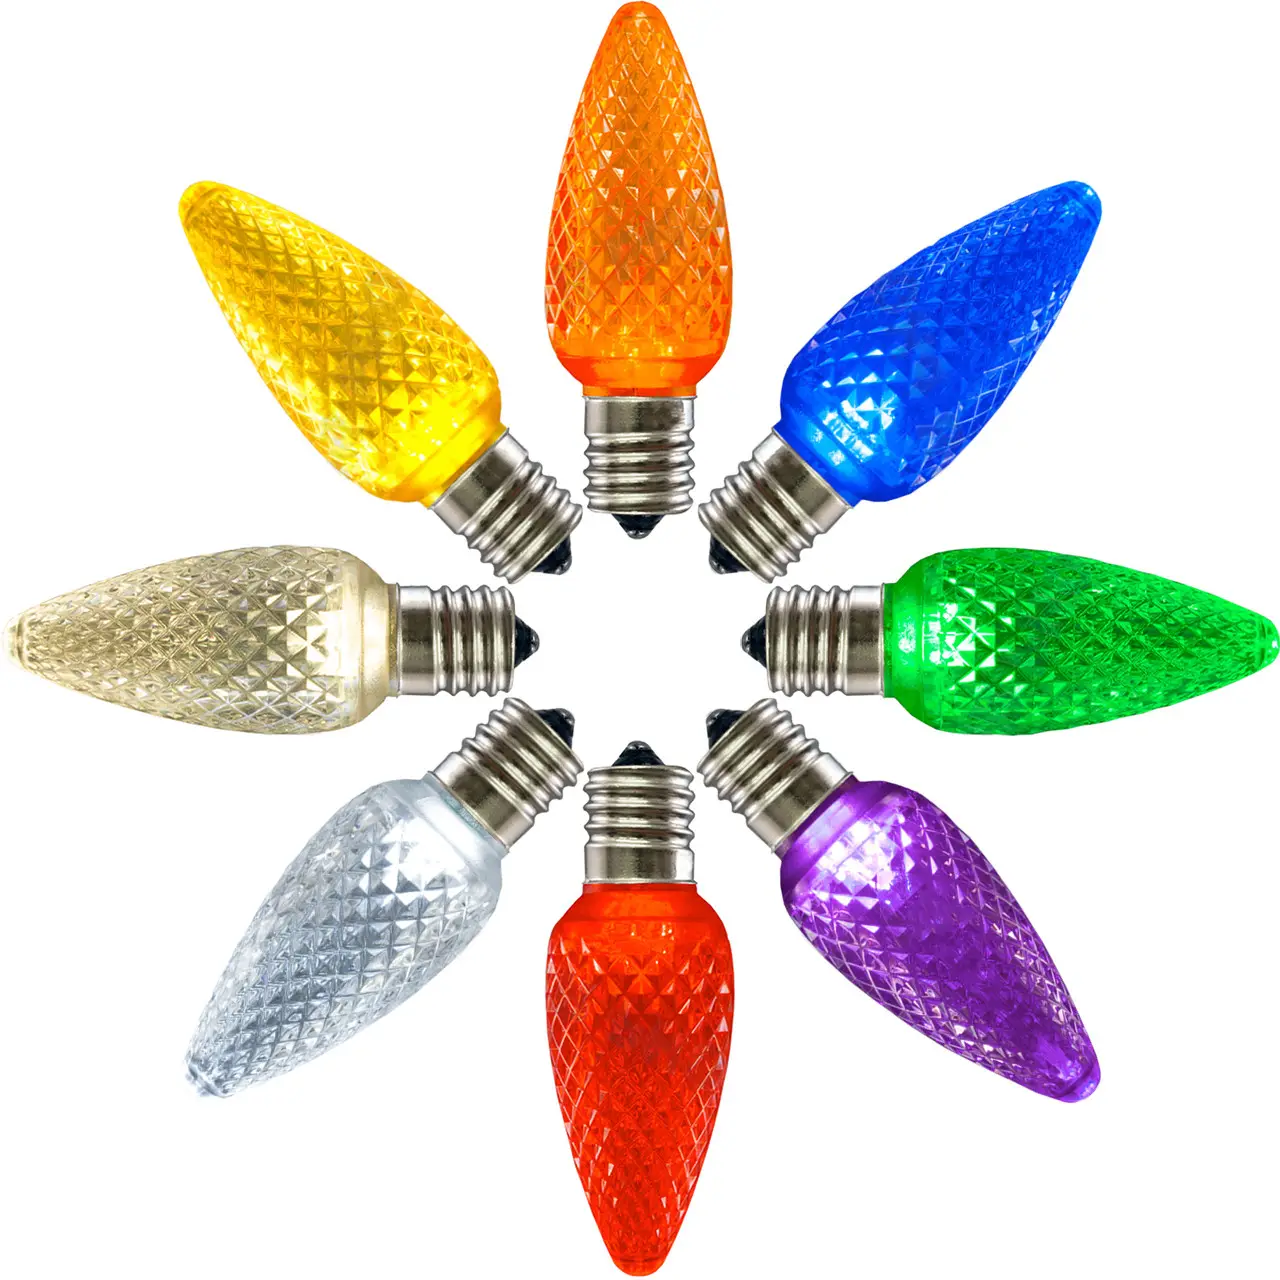 Colorful C9 Led Faceted Bulbs E17 Base Christmas Light Replacement Bulbs